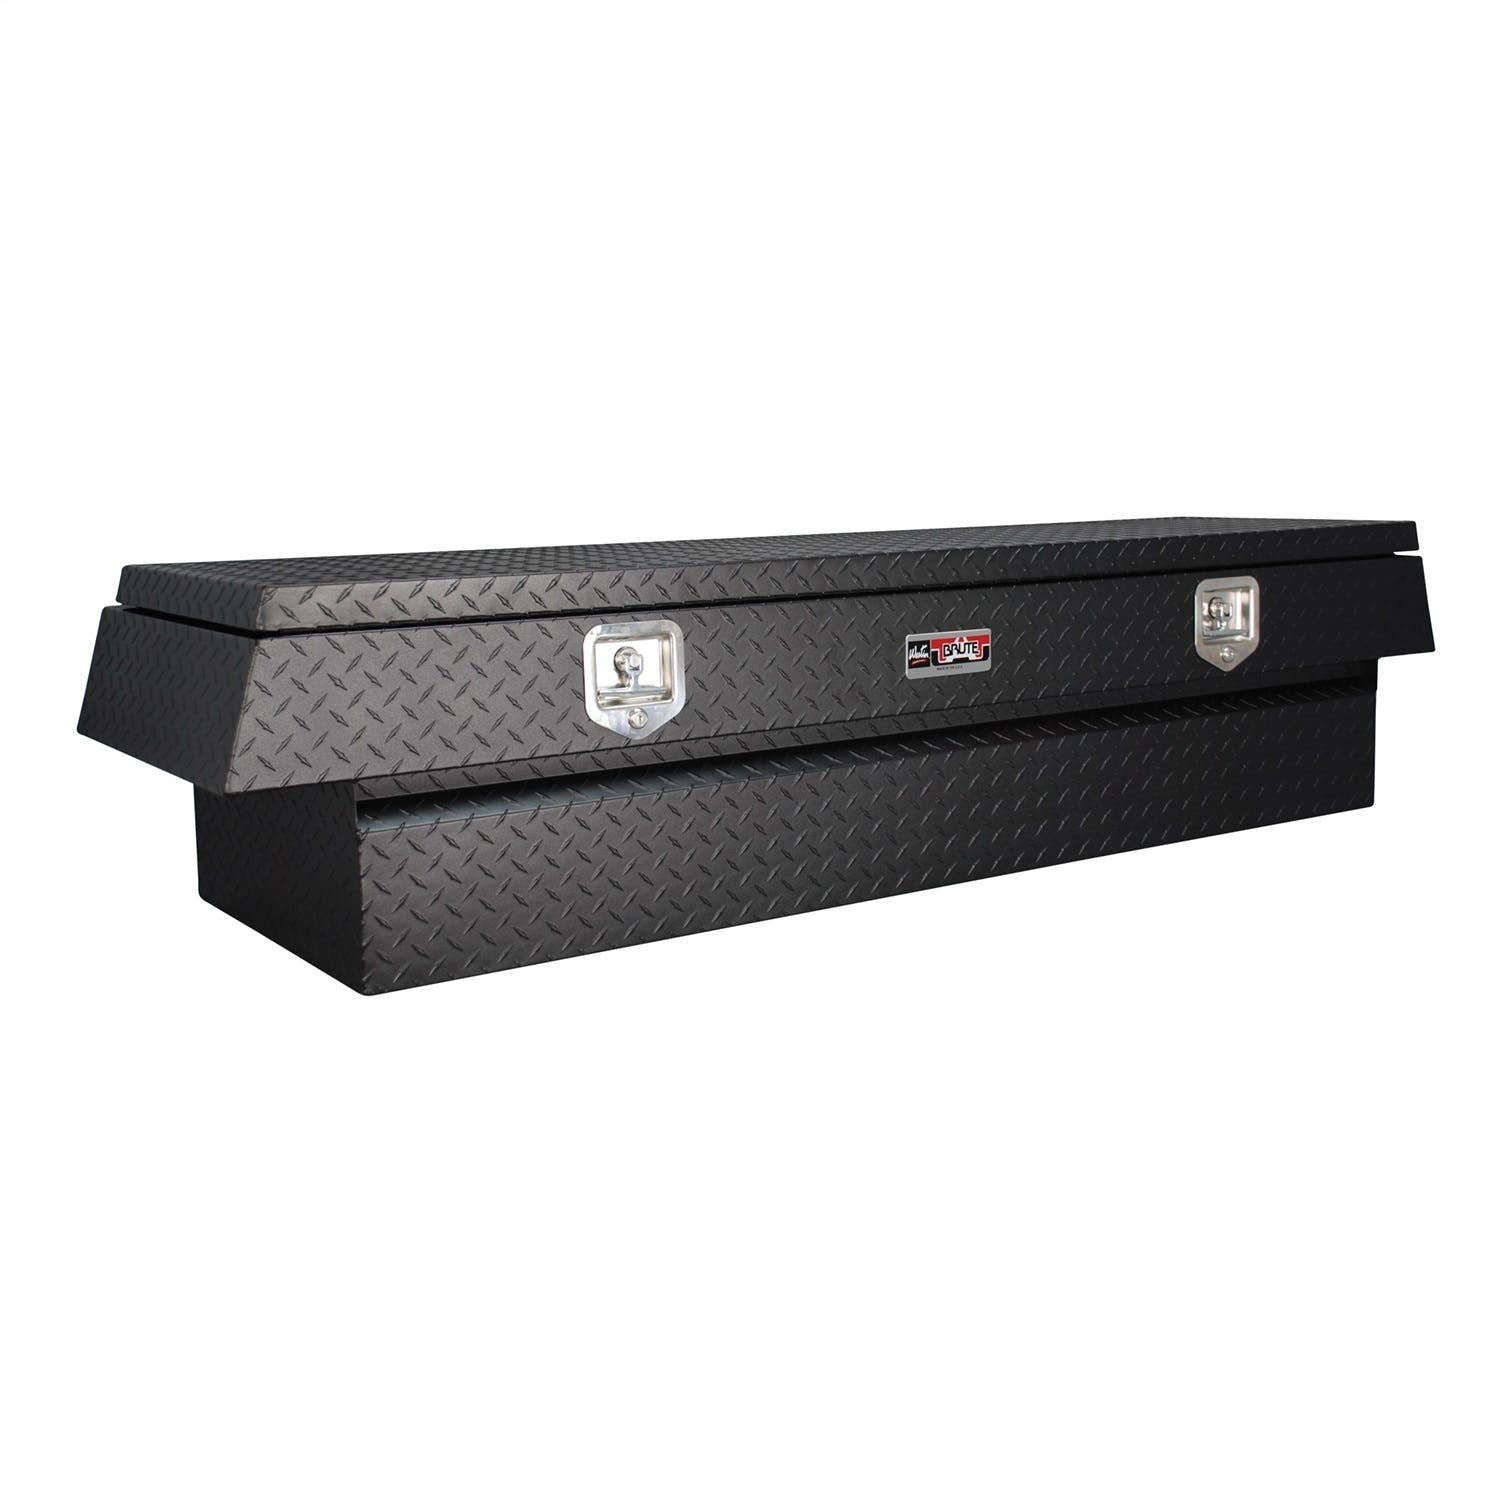 Westin Automotive 80-RB684-BT Chest 60in Xtra Wide Overall Dims: 60x27x19 In.; Base Dims